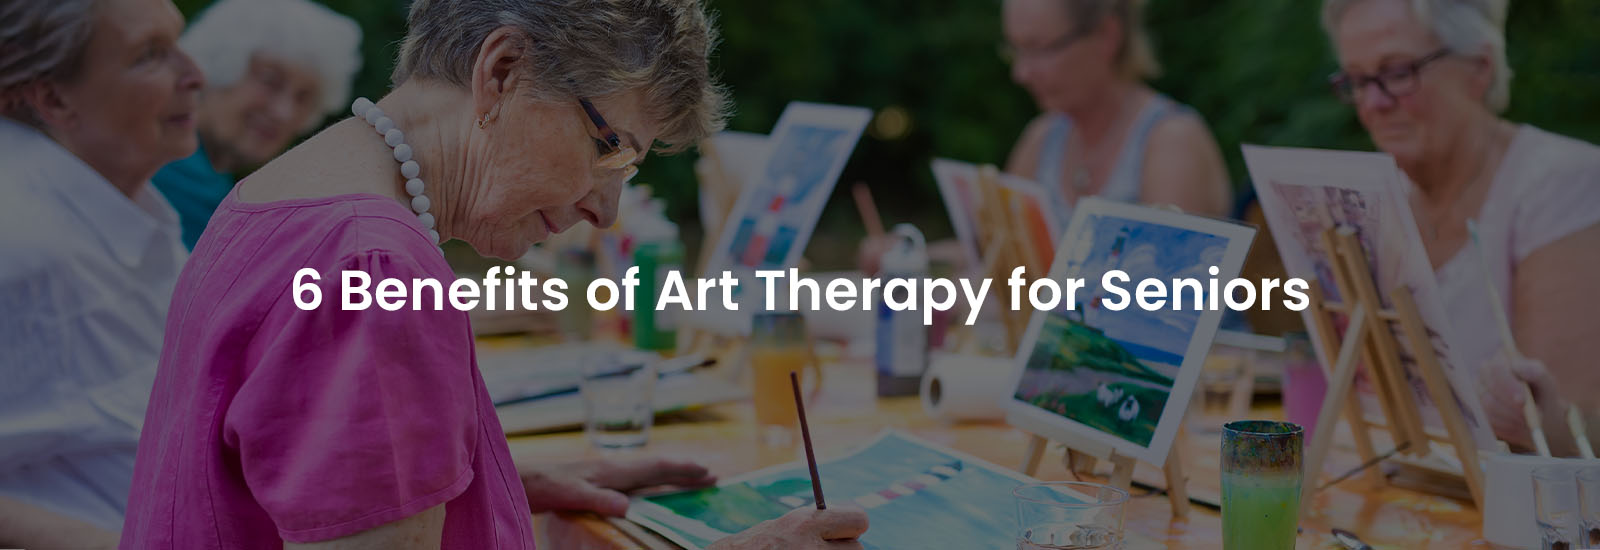 6 Benefits of Art Therapy for Seniors | Banner Image